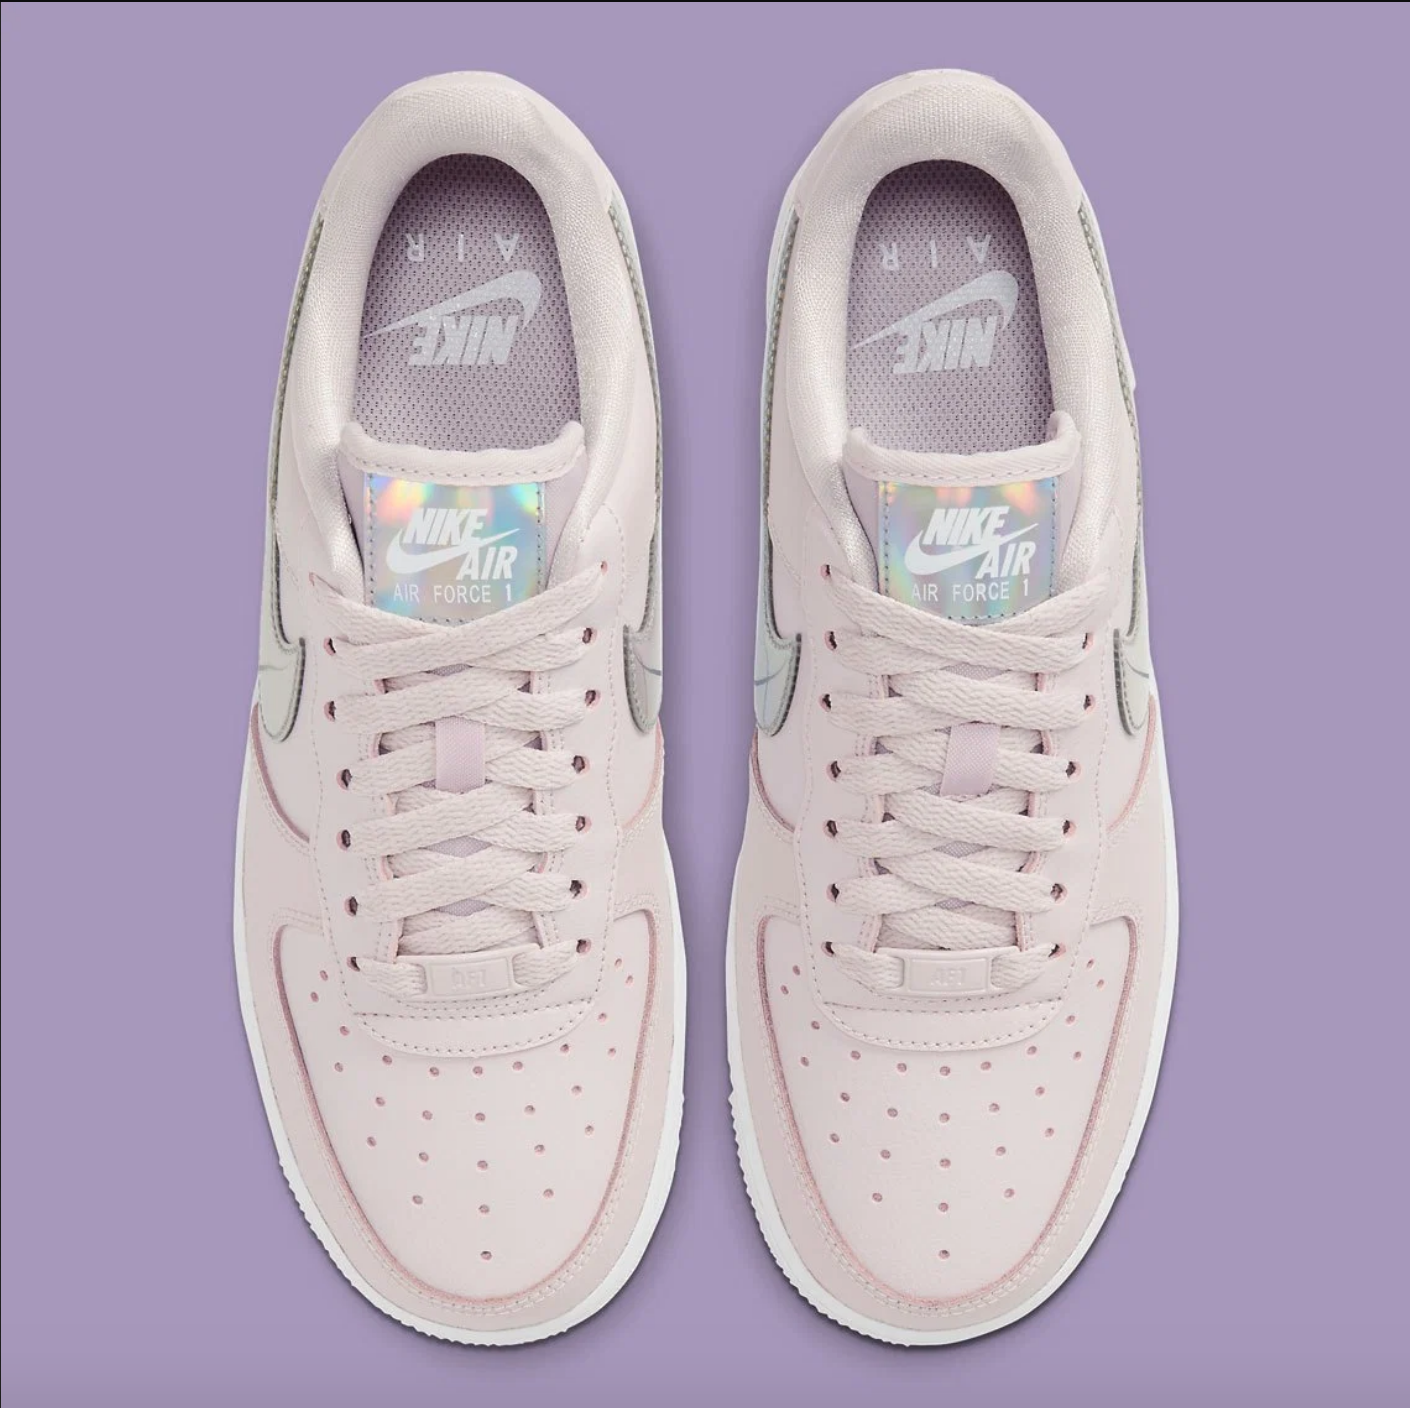 CNK-Nike-Air Force 1-Barely Rose-4.png